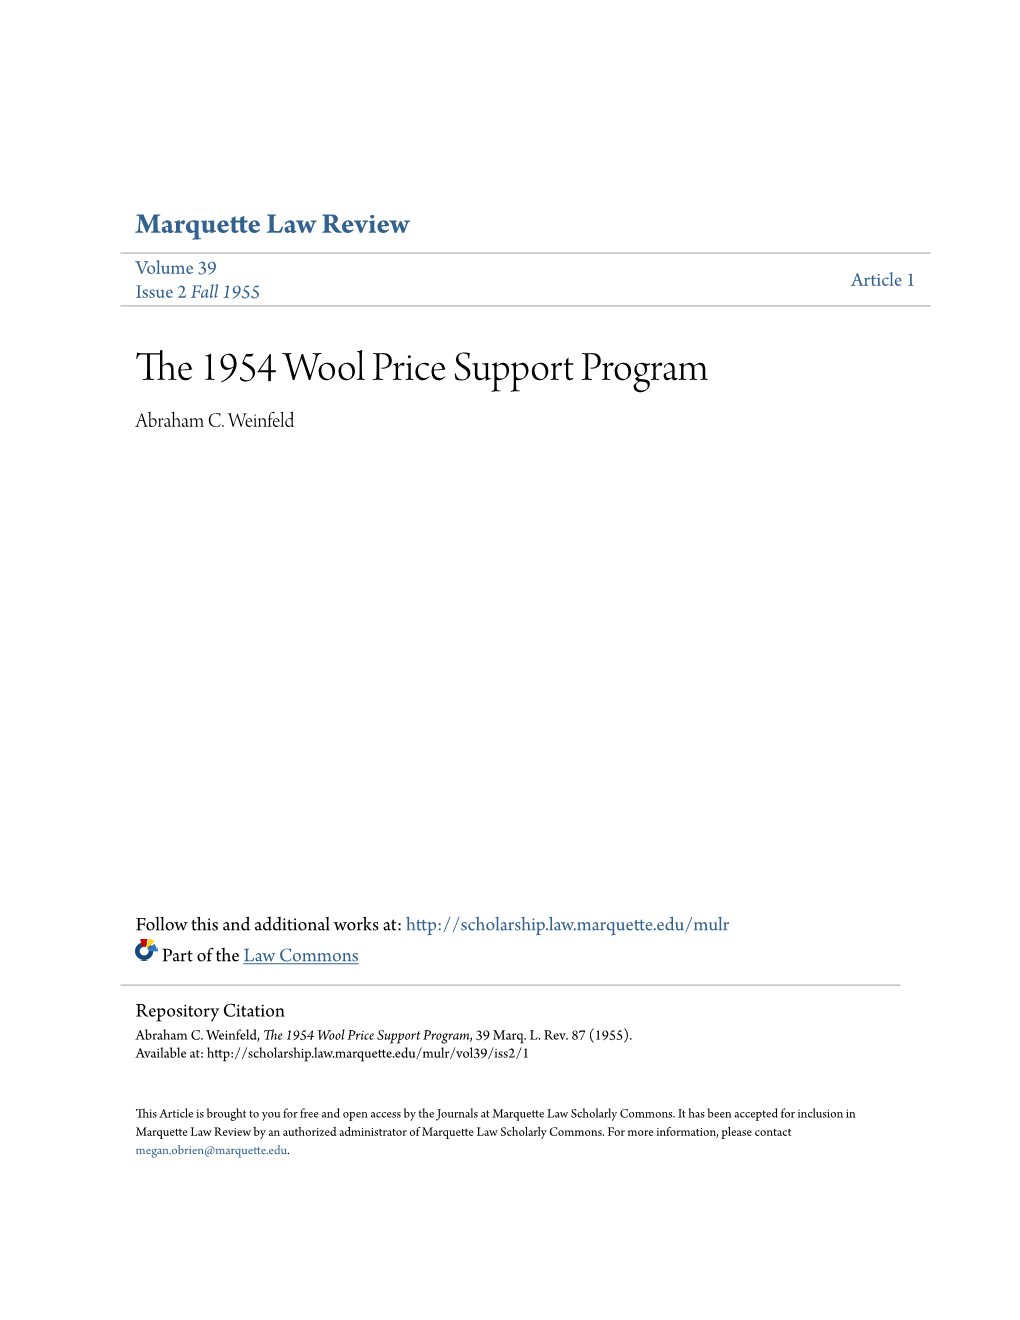 The 1954 Wool Price Support Program, 39 Marq